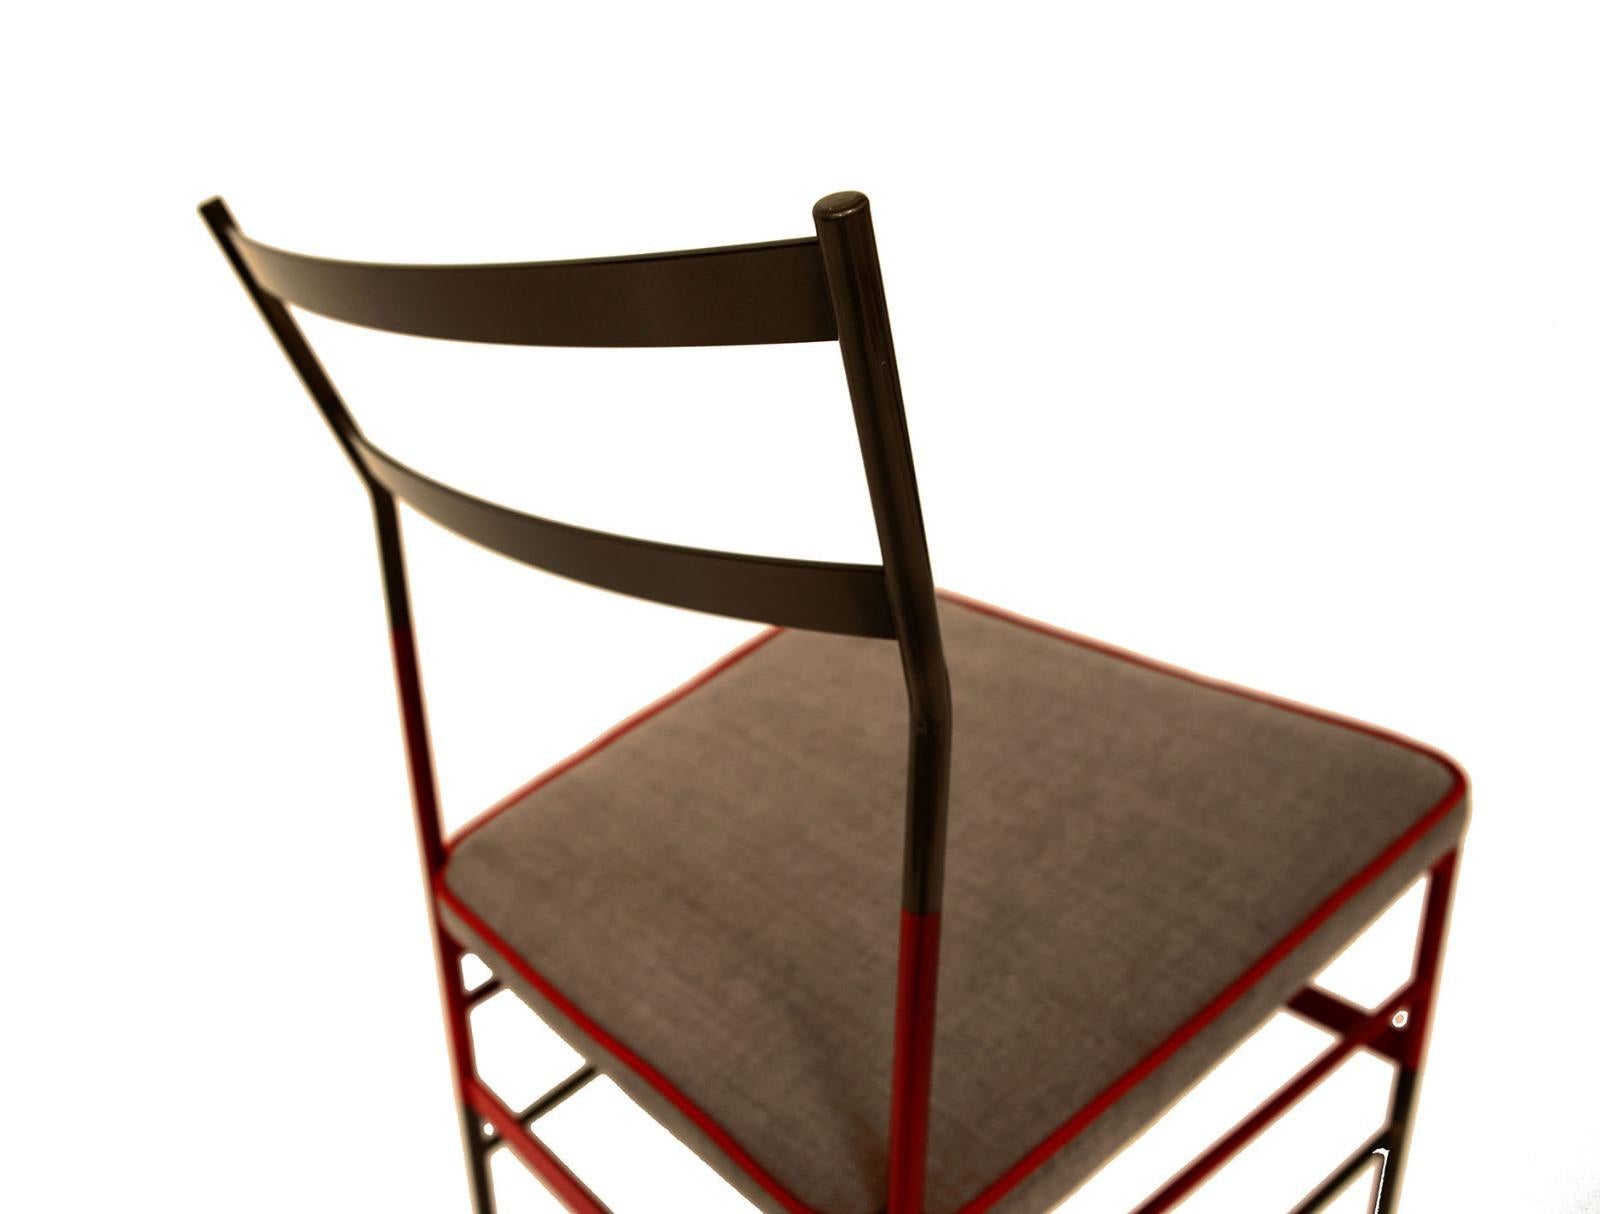 Exquisite craftsmanship and superb contemporary design are the hallmarks of this sleek, modern chair that will be visually stunning from a modern dining table. Its iron frame is made of high strength iron that has been painted with a timeless color